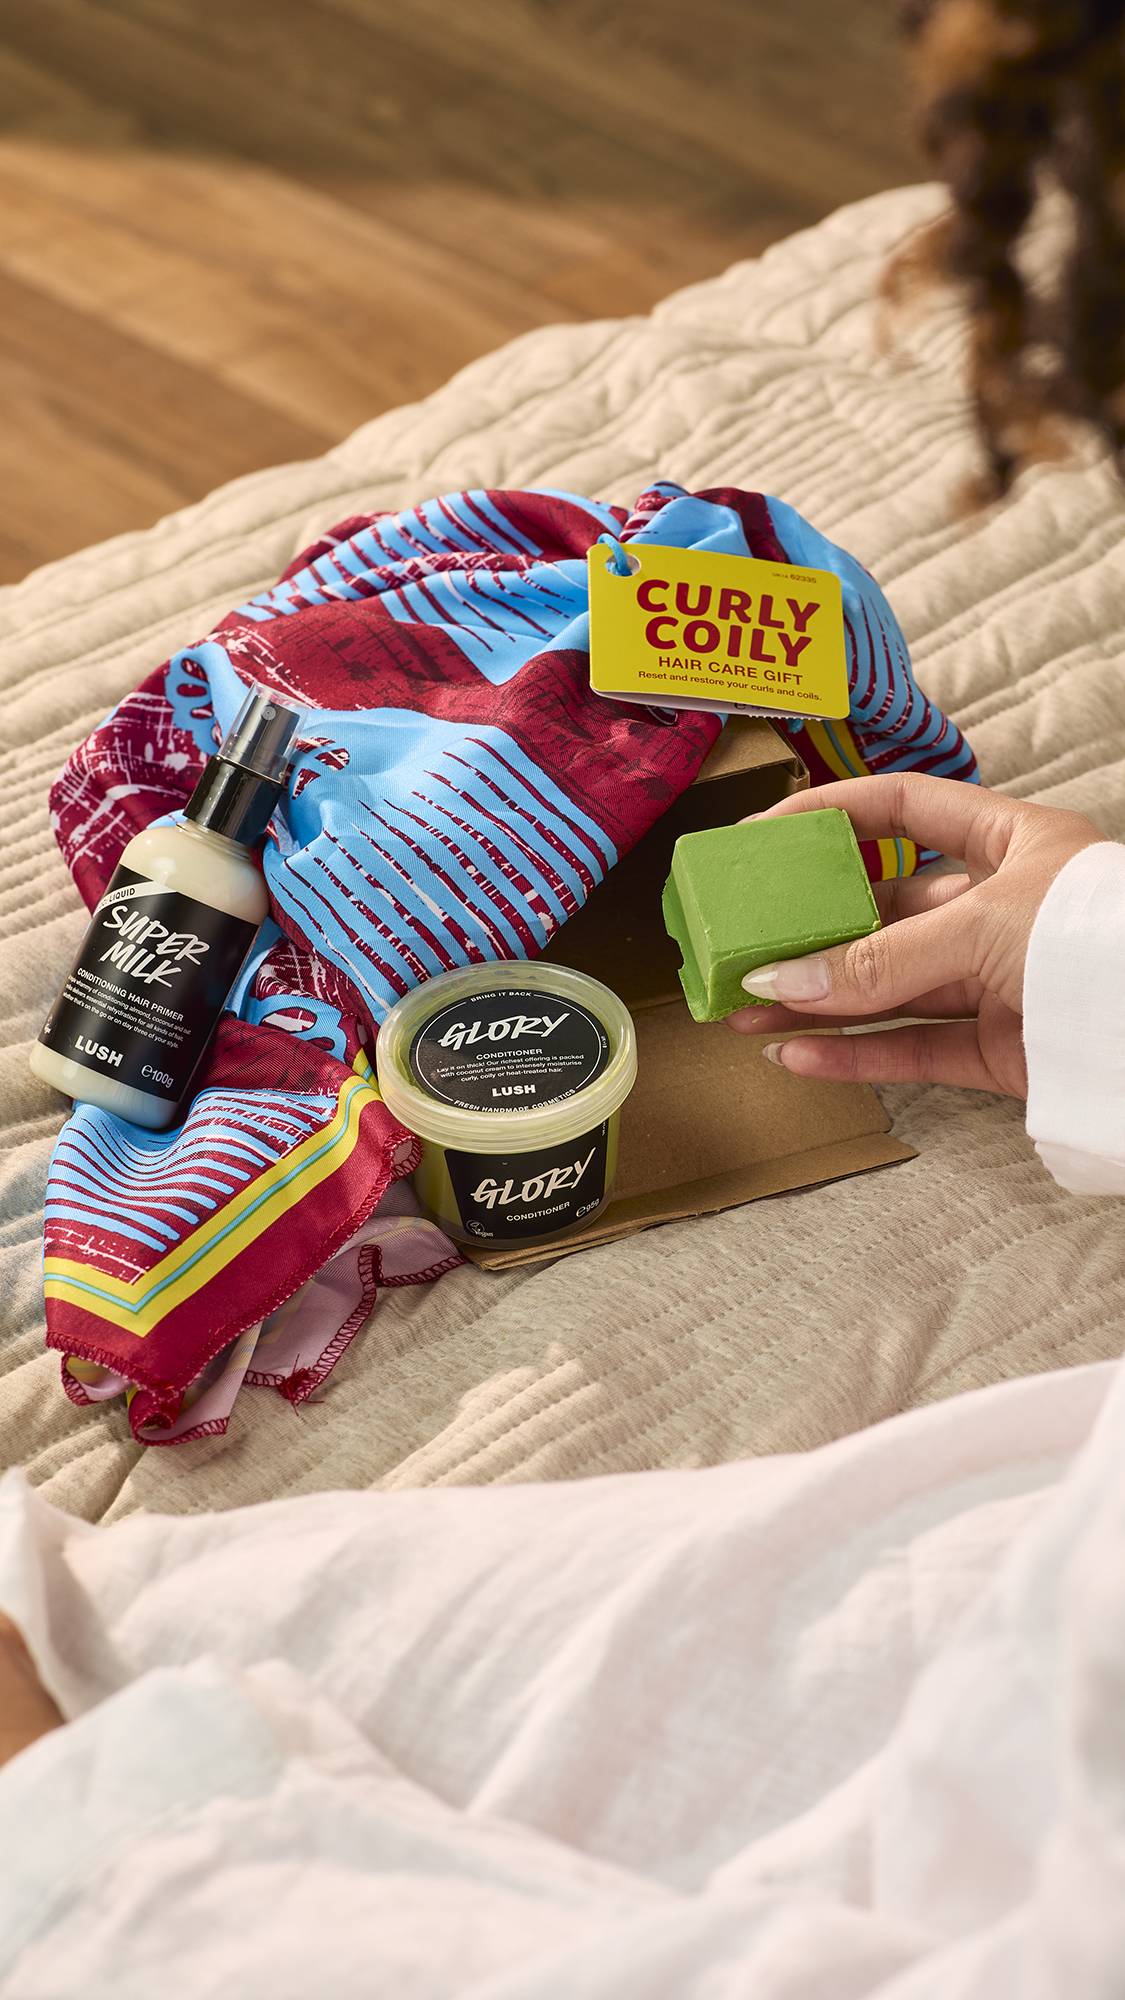 The image shows the Curly Coily gift, having been unpacked, with the three included haircare products on the bed. 